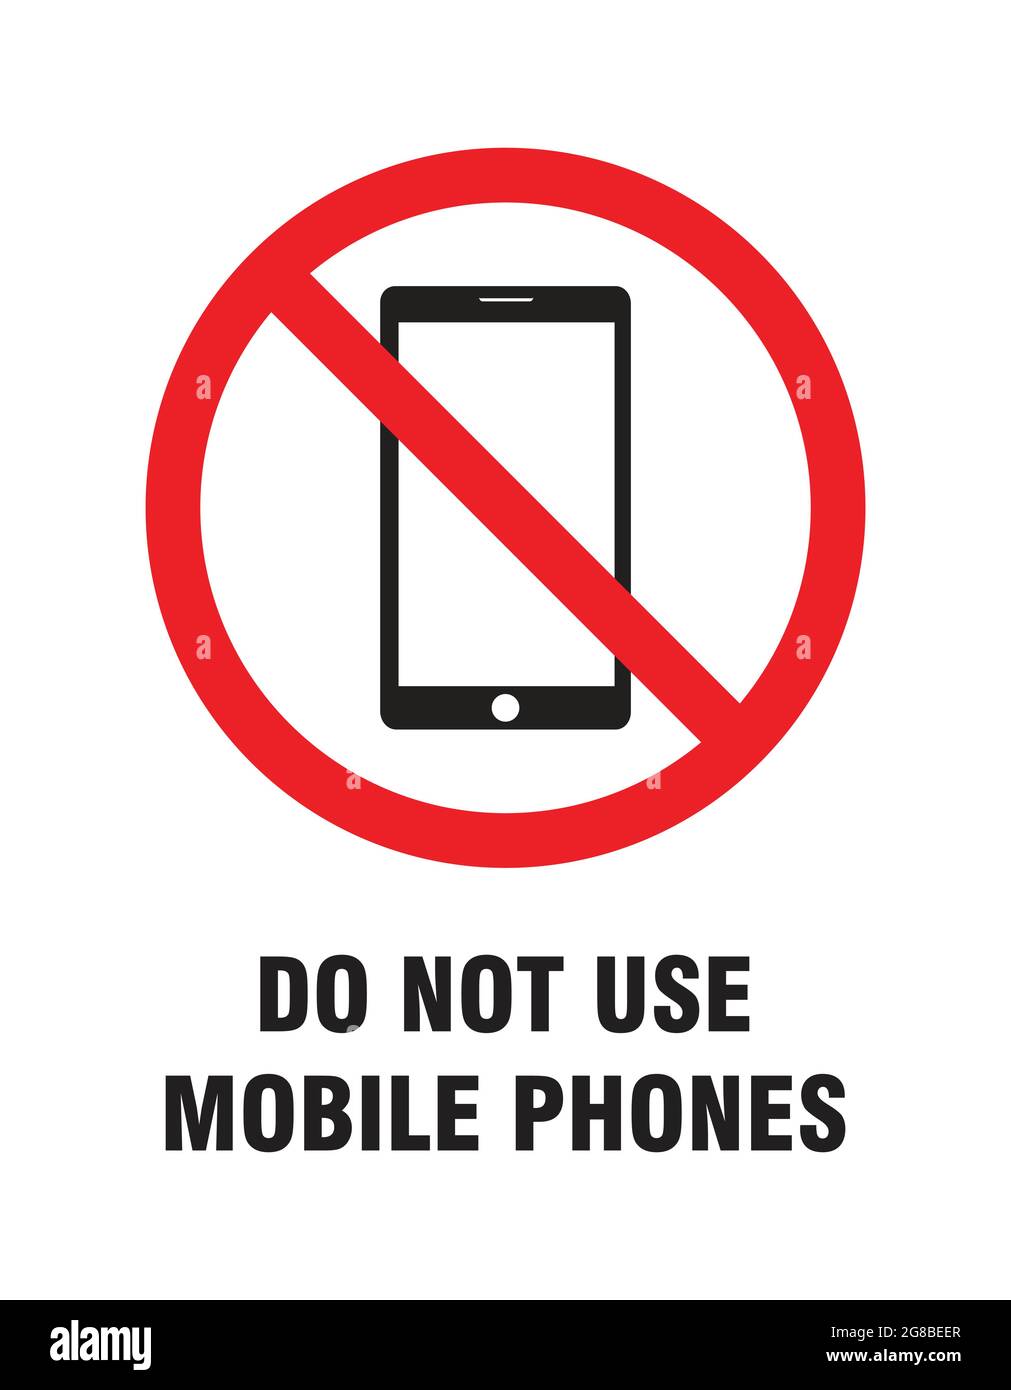 Do not use mobile phone sign Stock Vector